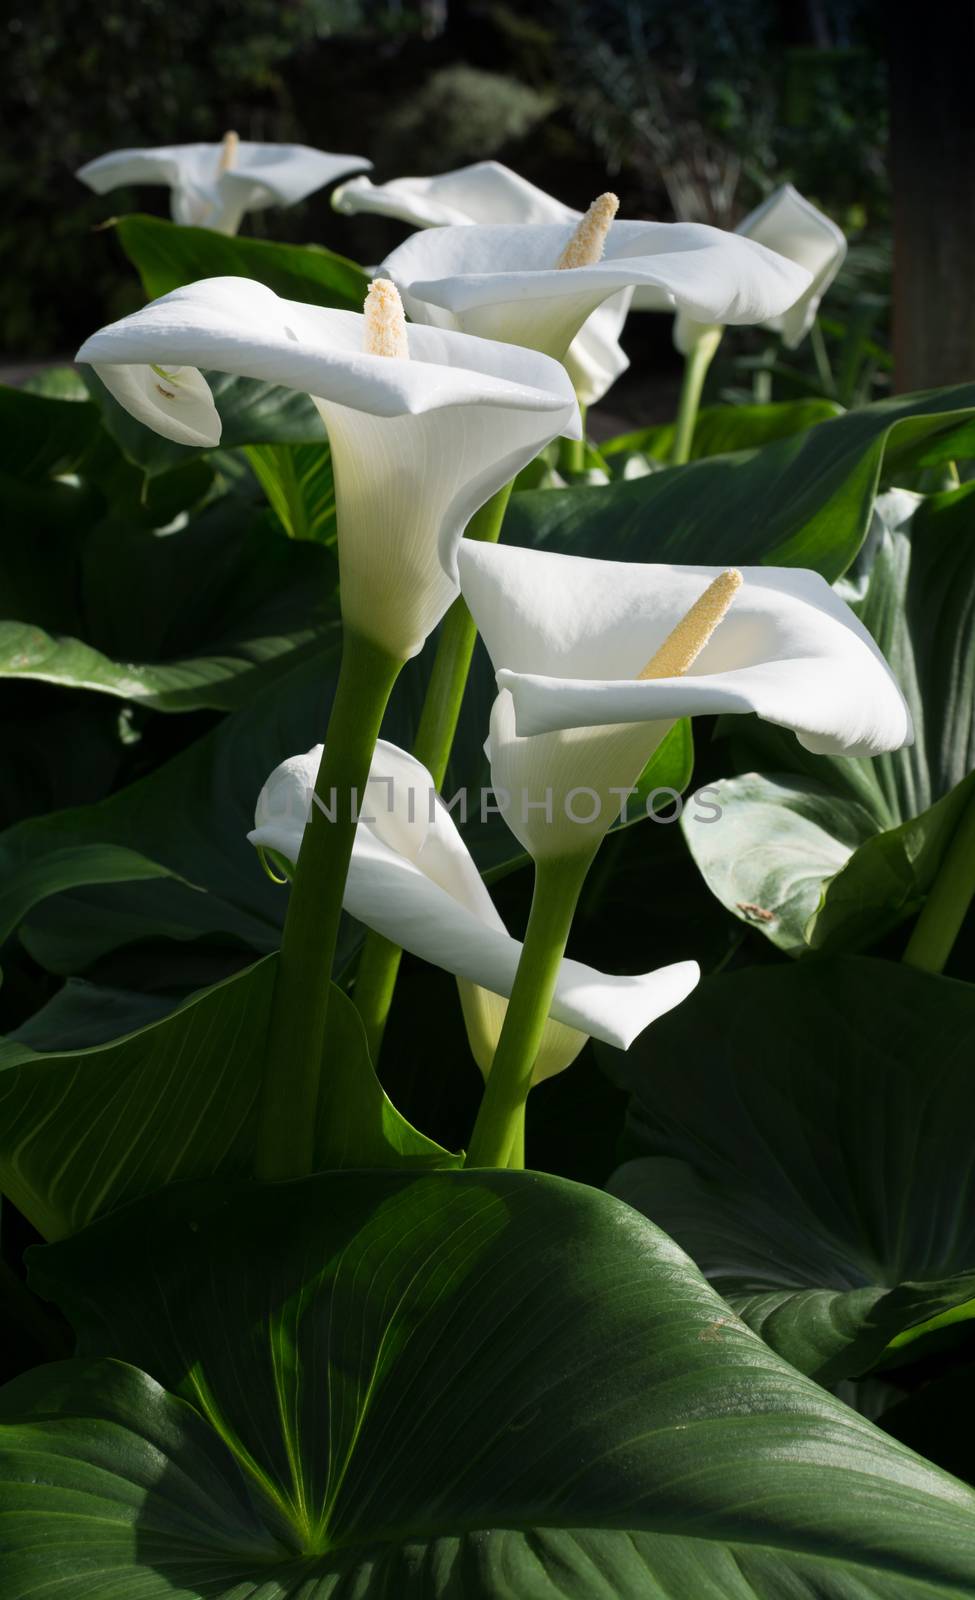 White calla lilies vertical image. Group of white callas with green leaves.